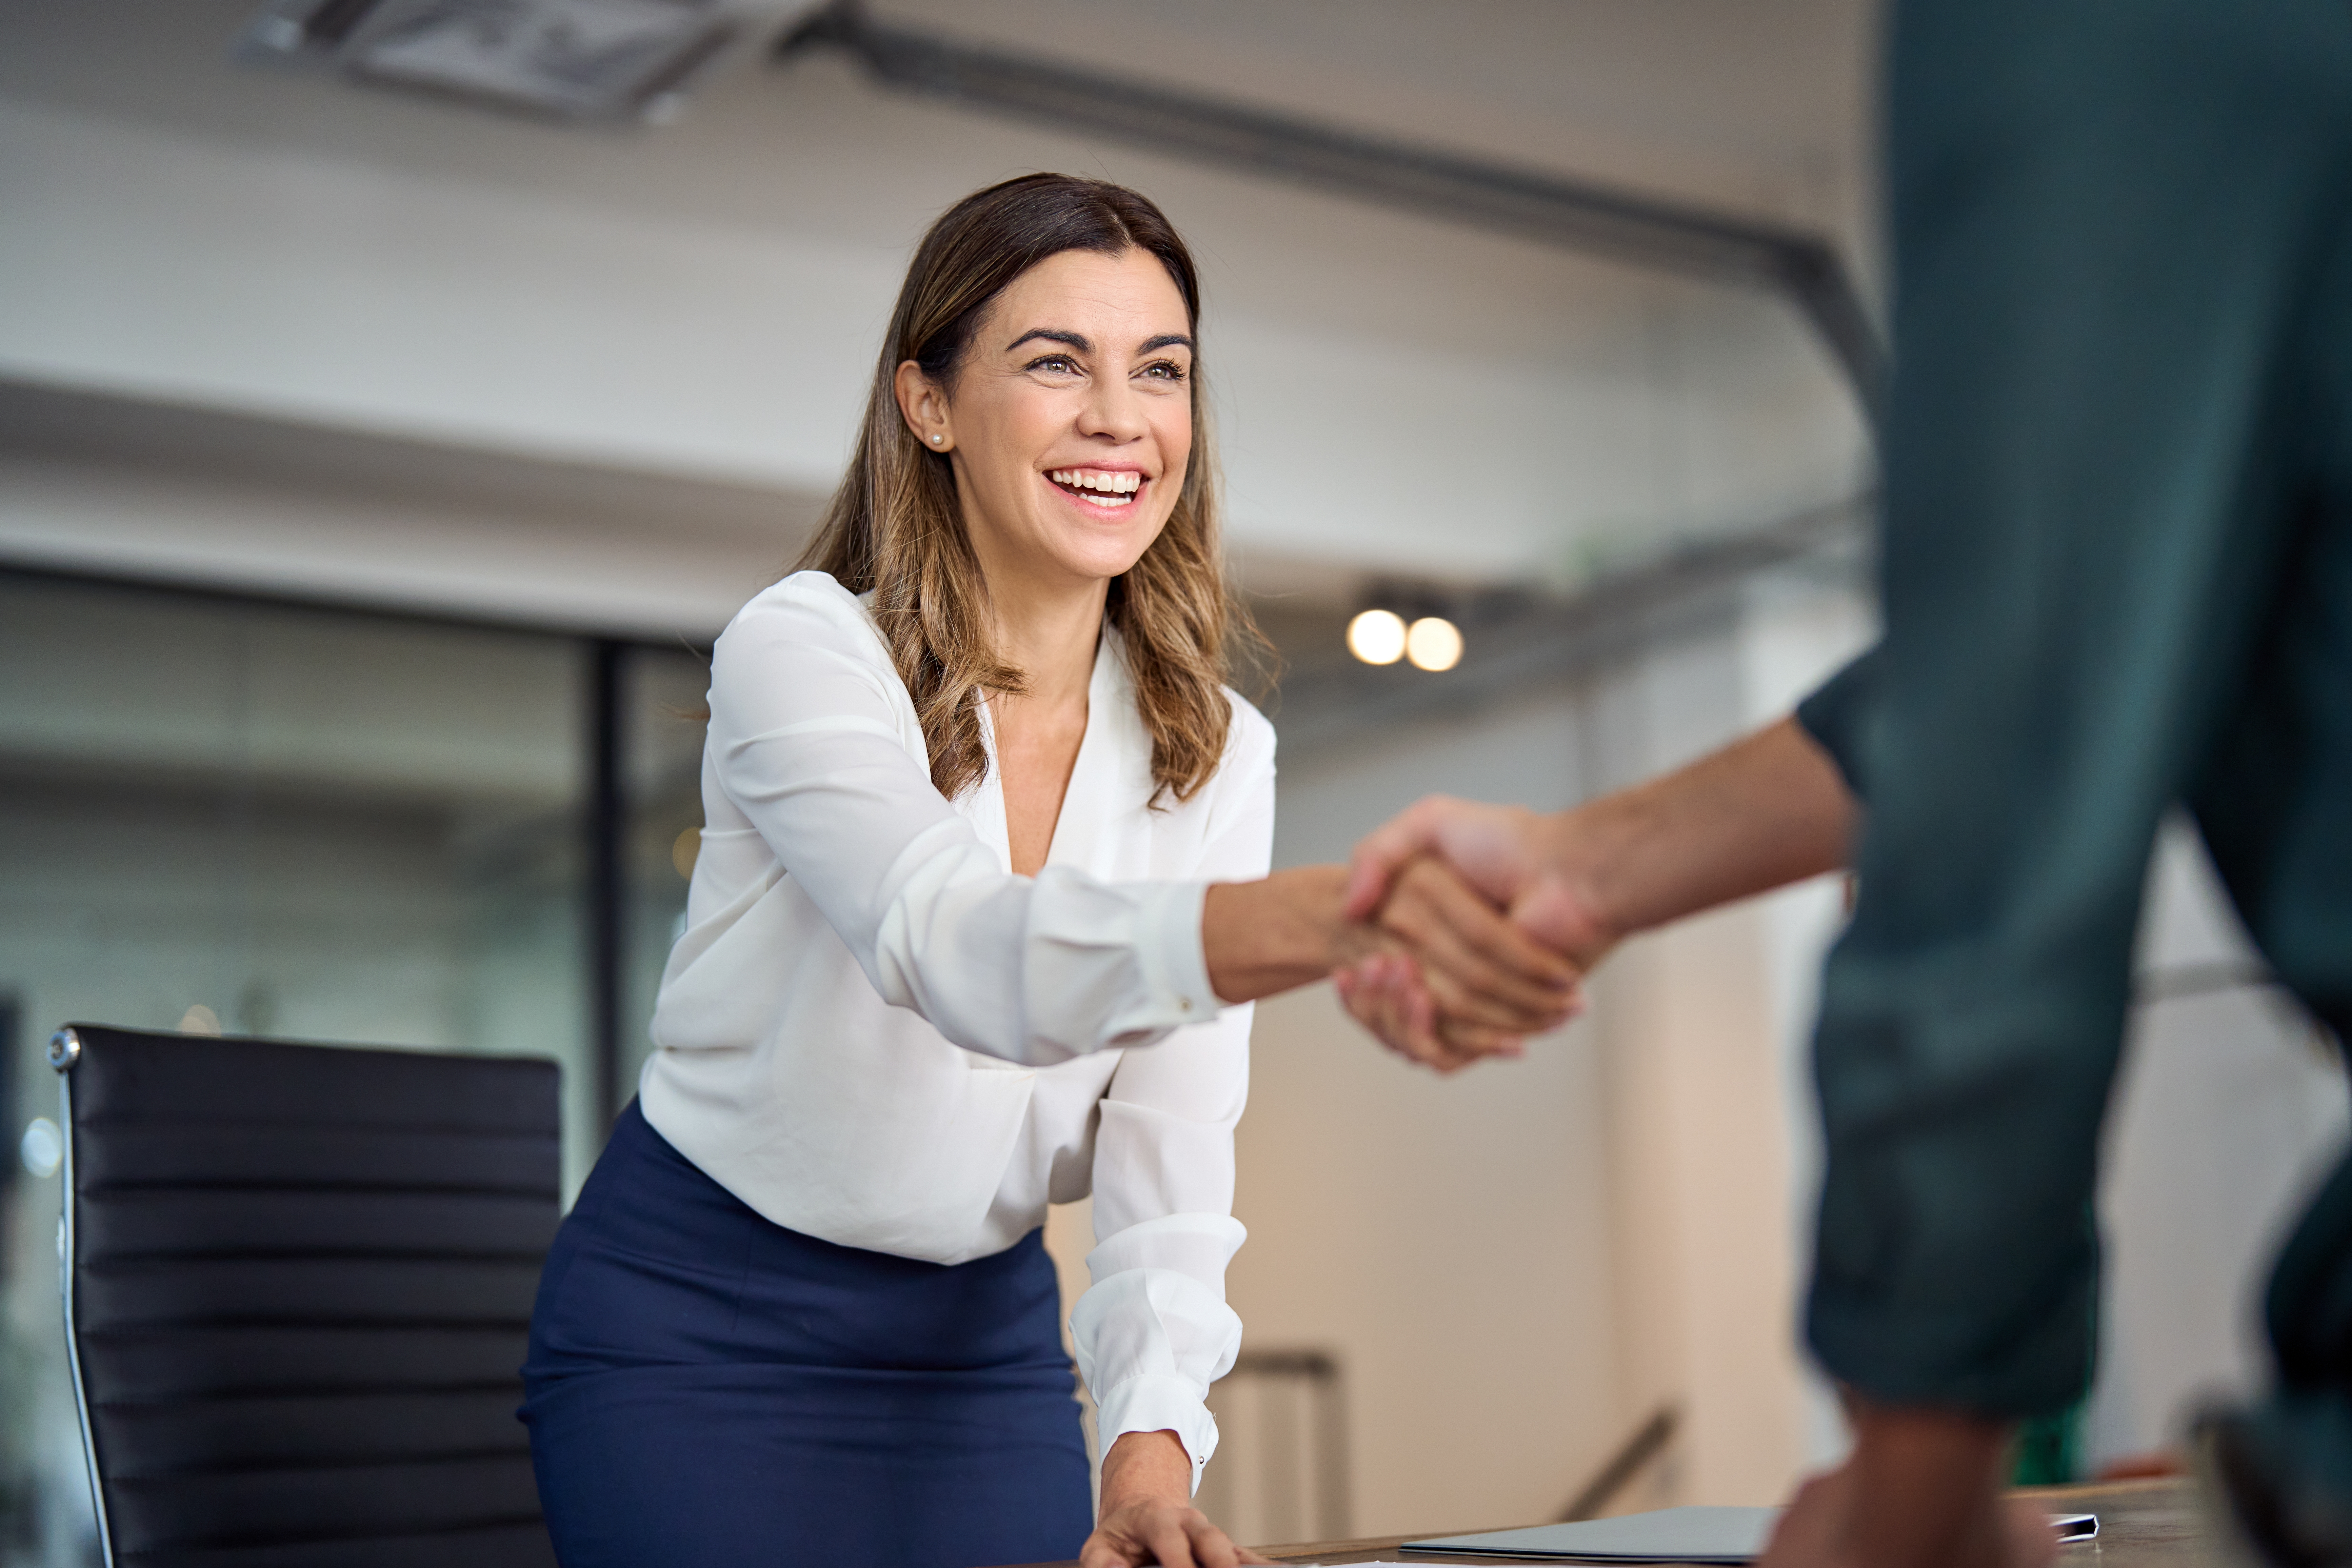 A happy woman shaking hands with a colleague in the office | Source: Shutterstock